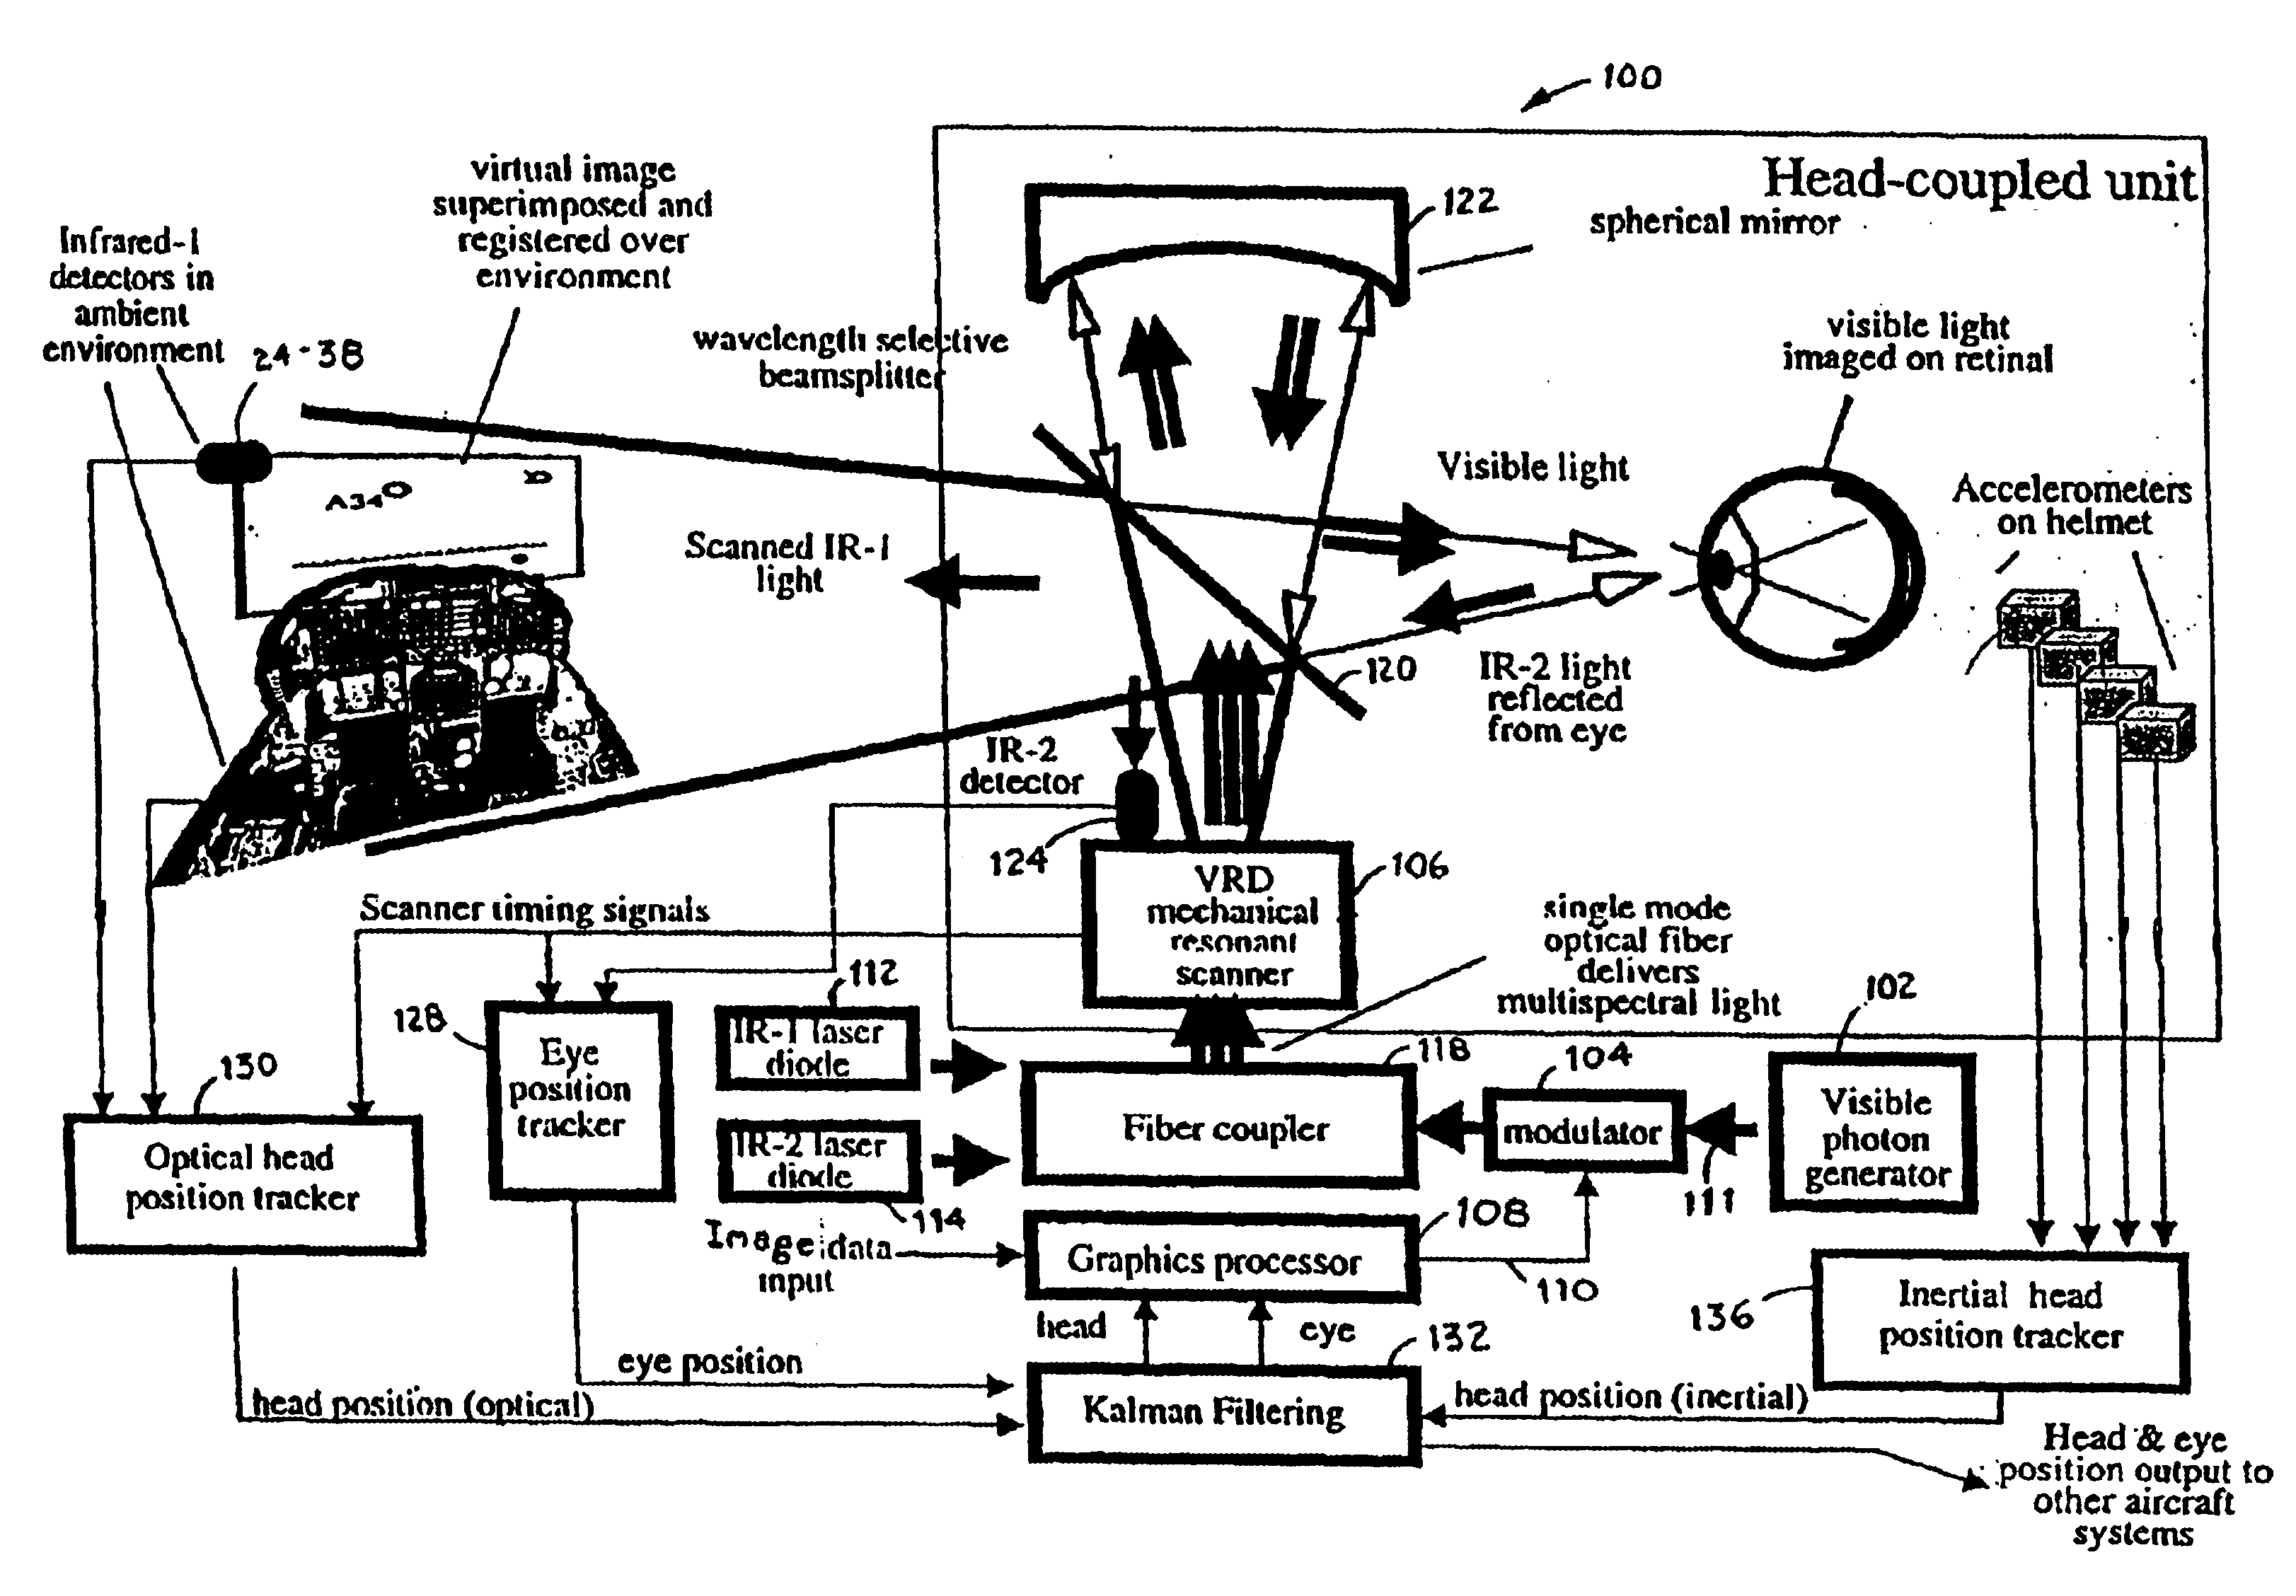 Virtual image registration in augmented display field